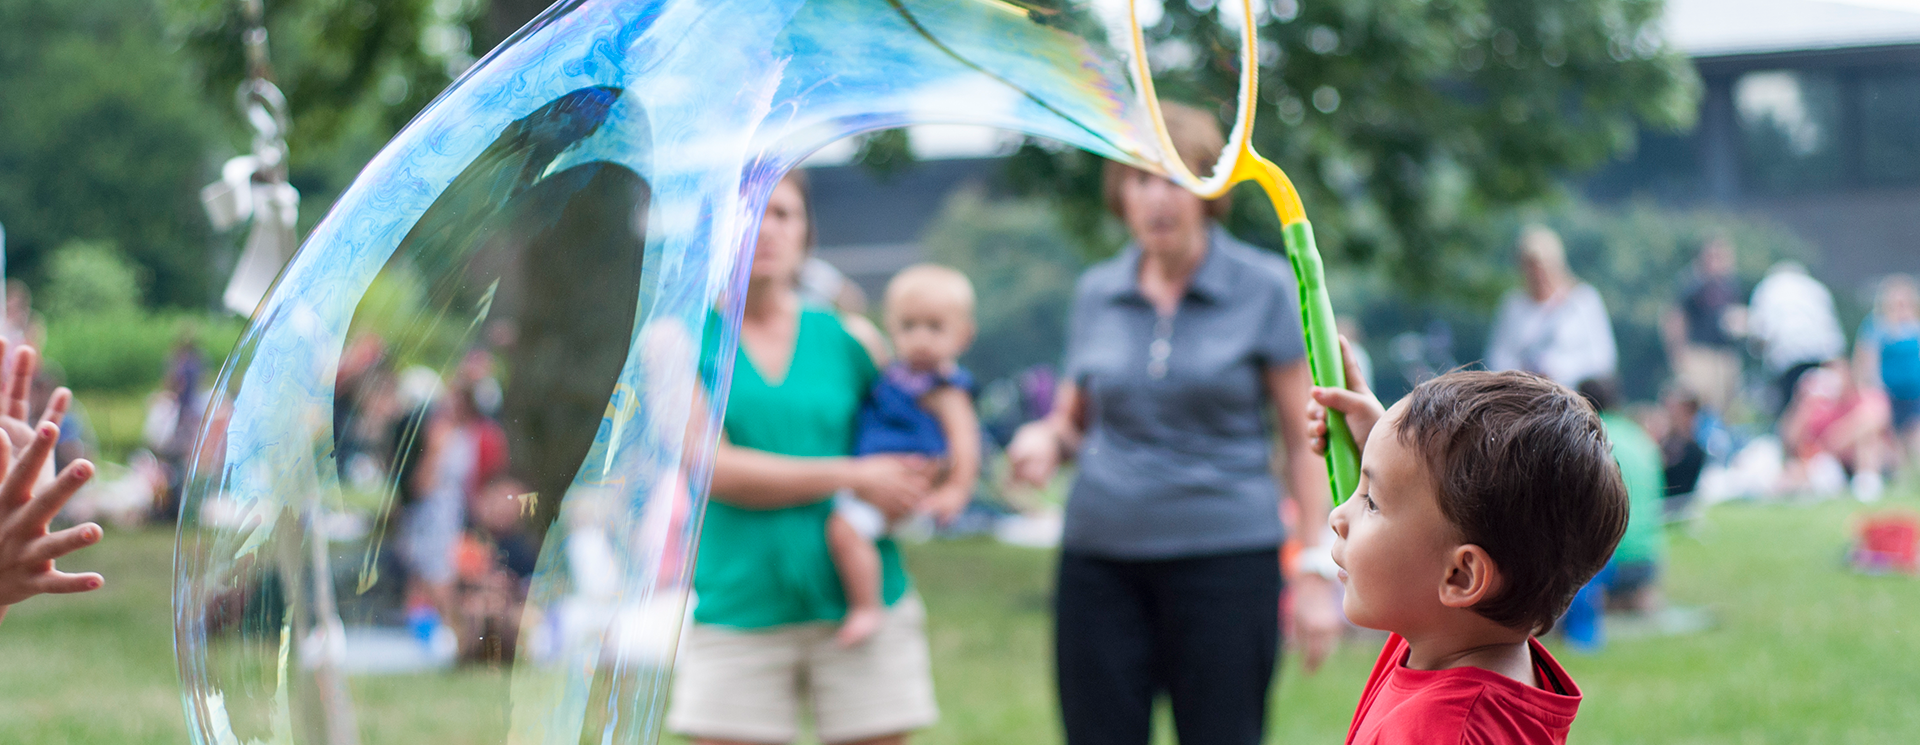 members picnic, kid holding a giant bubble